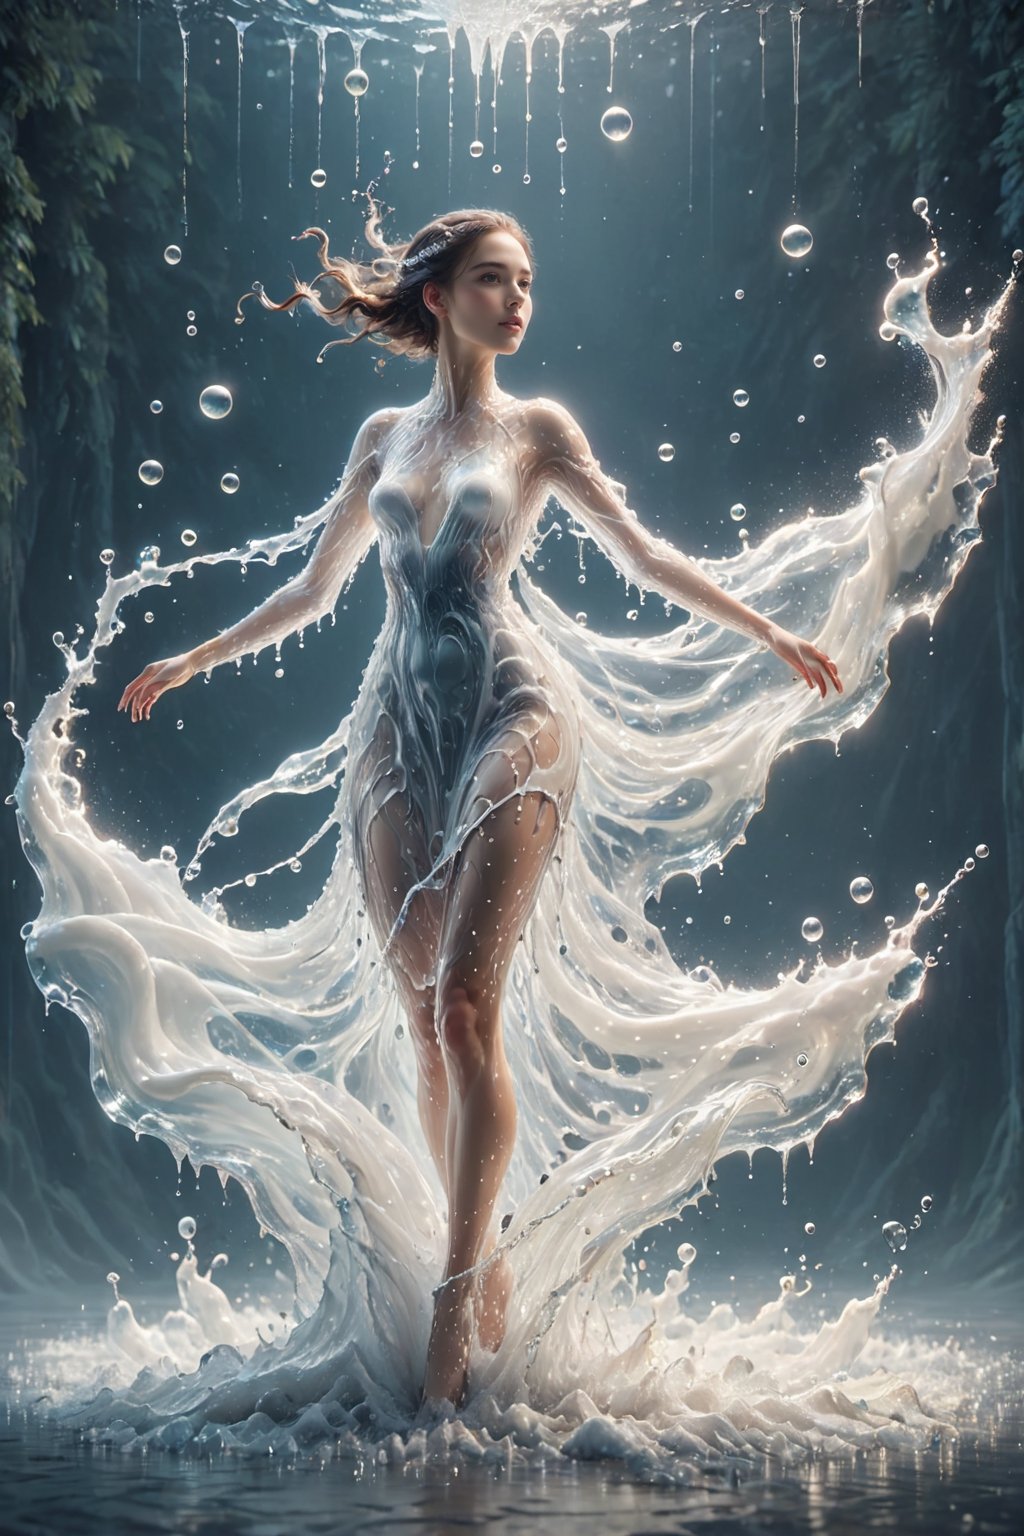 create a beautiful ukraine girl dancing with mik splash wedding dress , splashed,spray ,spray from two side  , subsurface scattering, translucent, 100mm,Movie Still,detailmaster2,Film Still,make_3d,aesthetic portrait,eyes shoot , full body , ballet pose , 1girl , beauty nose and mouth , A-line , flying wrap dress, secret,liquid dress,watce , background in dark studio , one_hand_raised , skirt vanish in another side  , dress look more liquid , tall girl , white water ,  milk white , backdround with fantasy color bubbles,eyes shoot